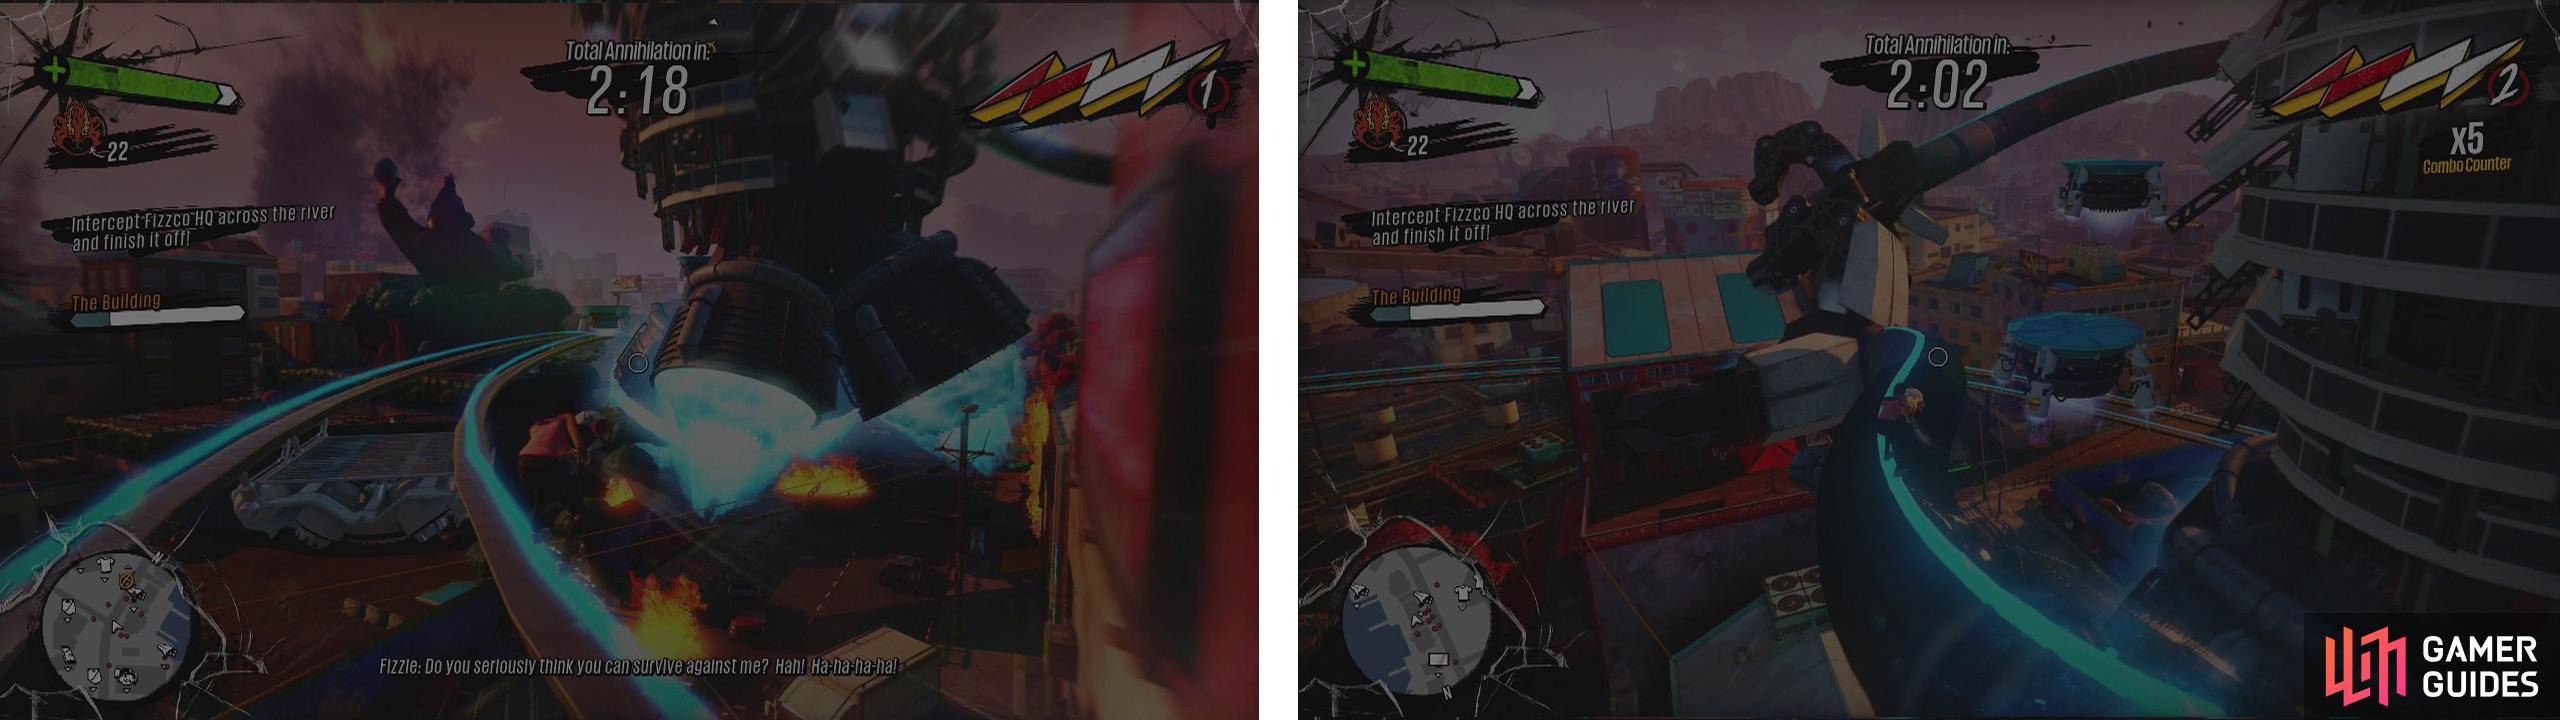 Sunset Overdrive Gameplay Video Shows a Ton of New Stuff and a Boss Fight